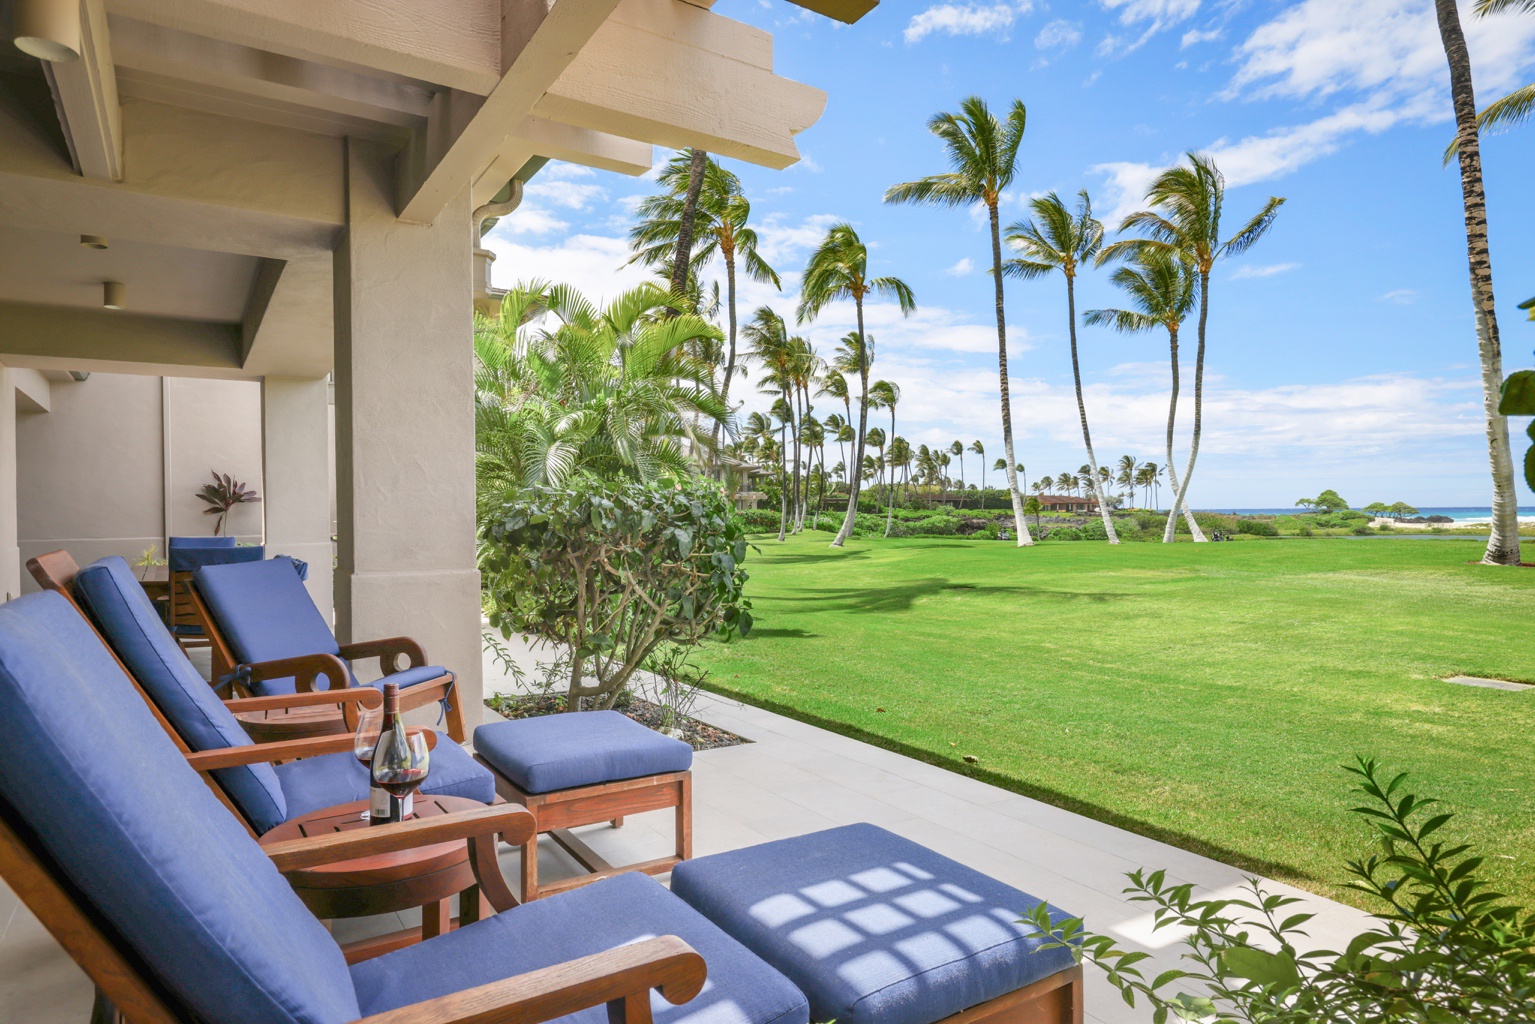 Kailua Kona Vacation Rentals, 3BD Golf Villa (3101) at Four Seasons Resort at Hualalai - Enjoy a relaxing drink on the lanai with scenic golf course view.